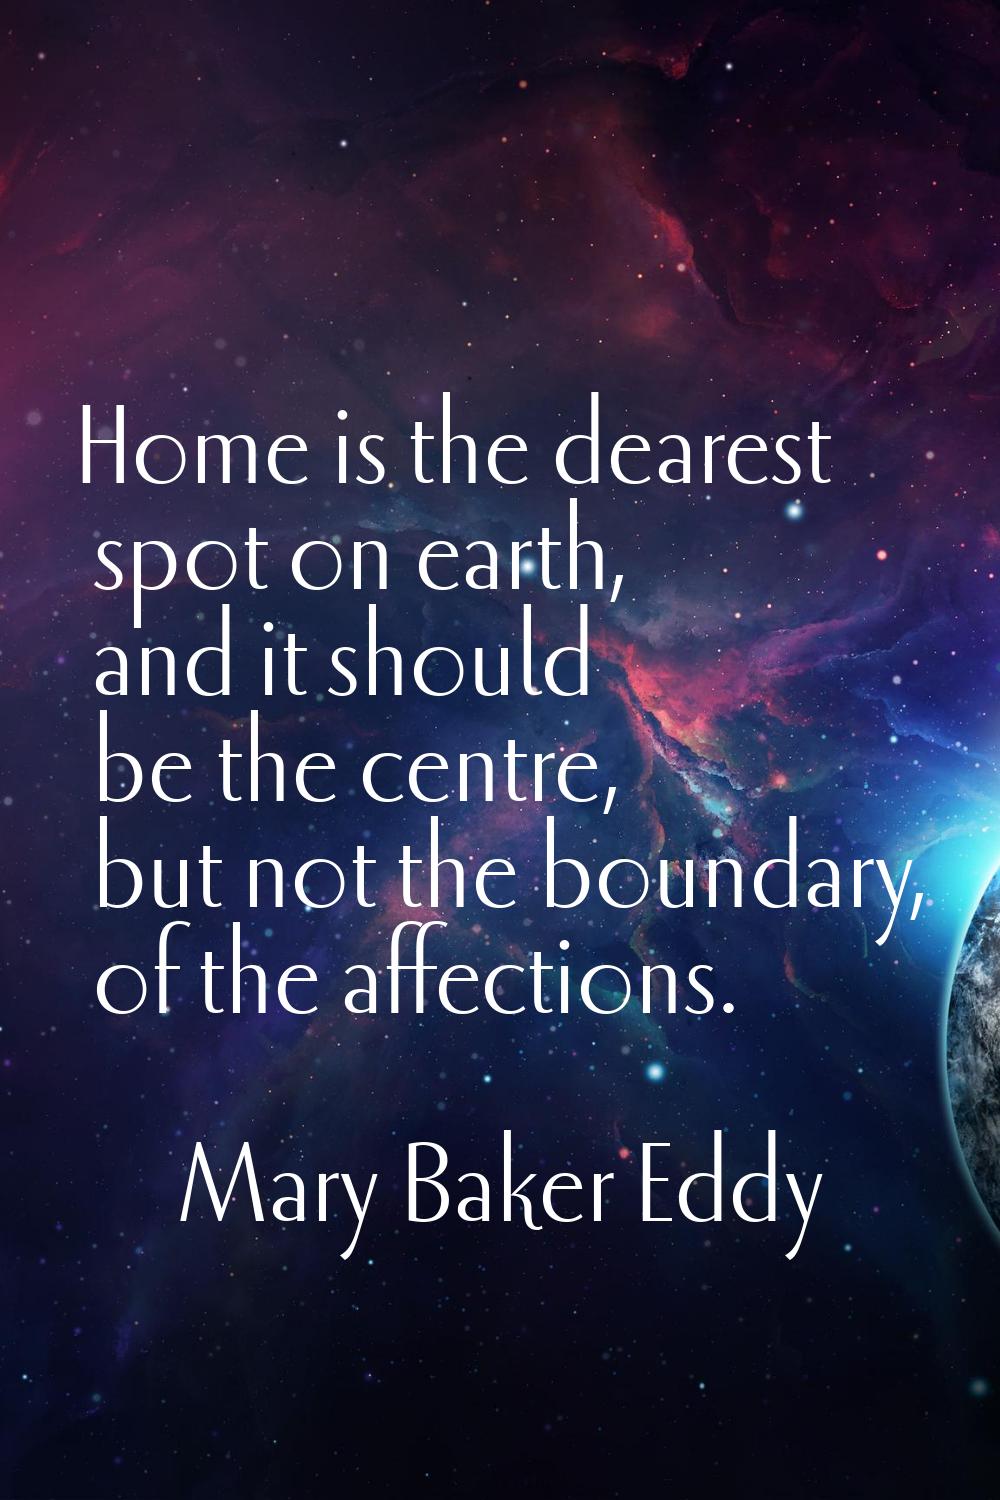 Home is the dearest spot on earth, and it should be the centre, but not the boundary, of the affect